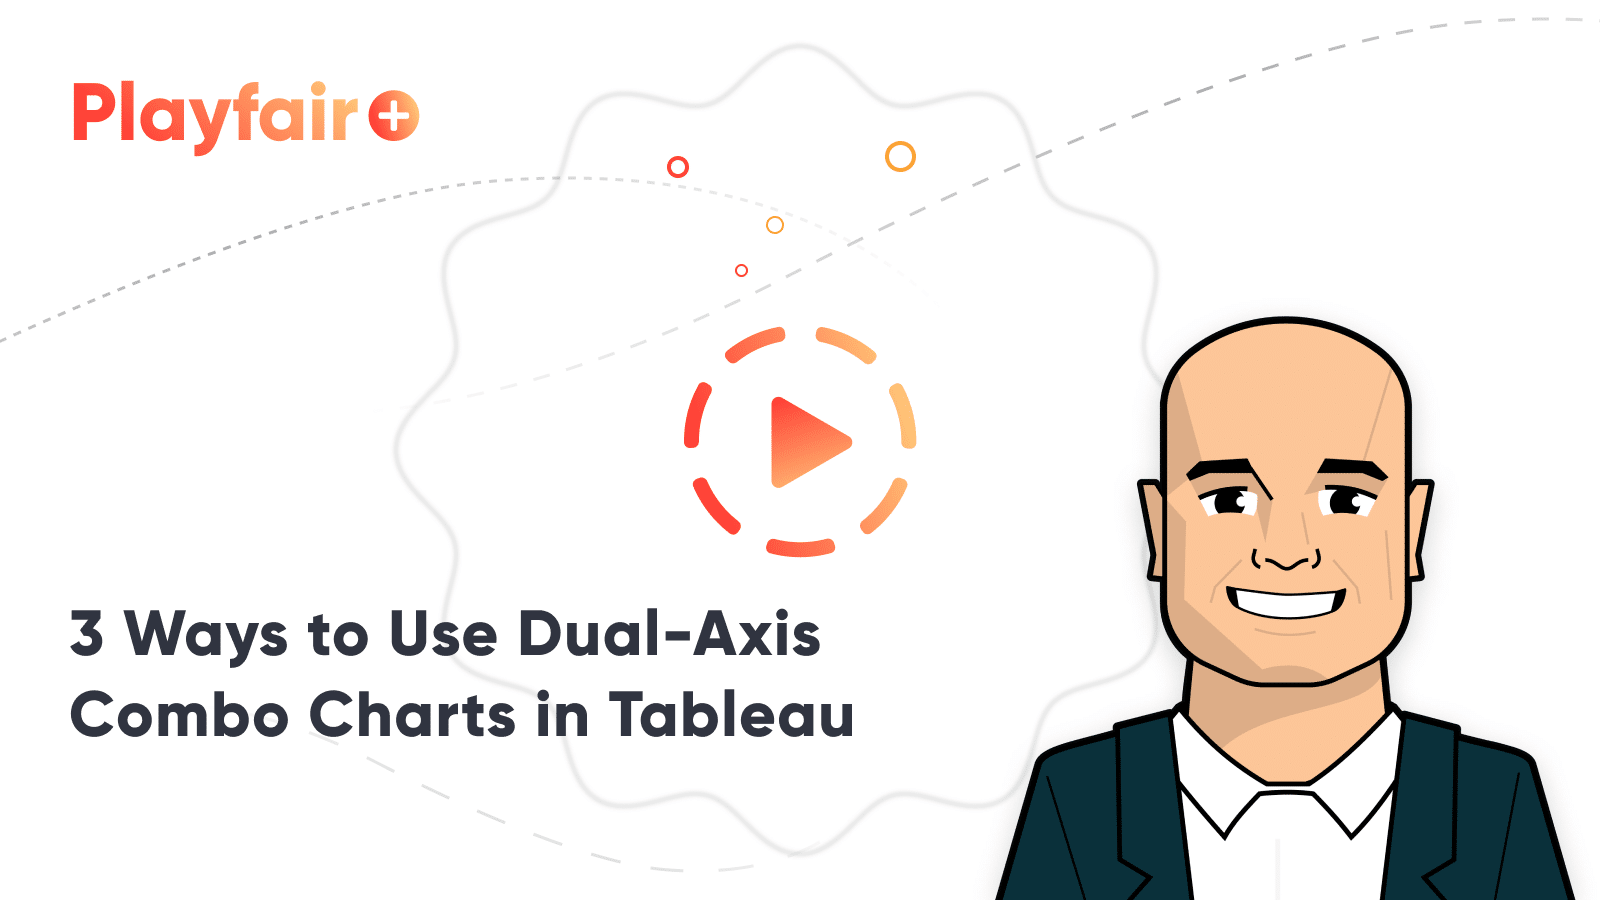 3 Ways to Use Dual-Axis Combo Charts in Tableau